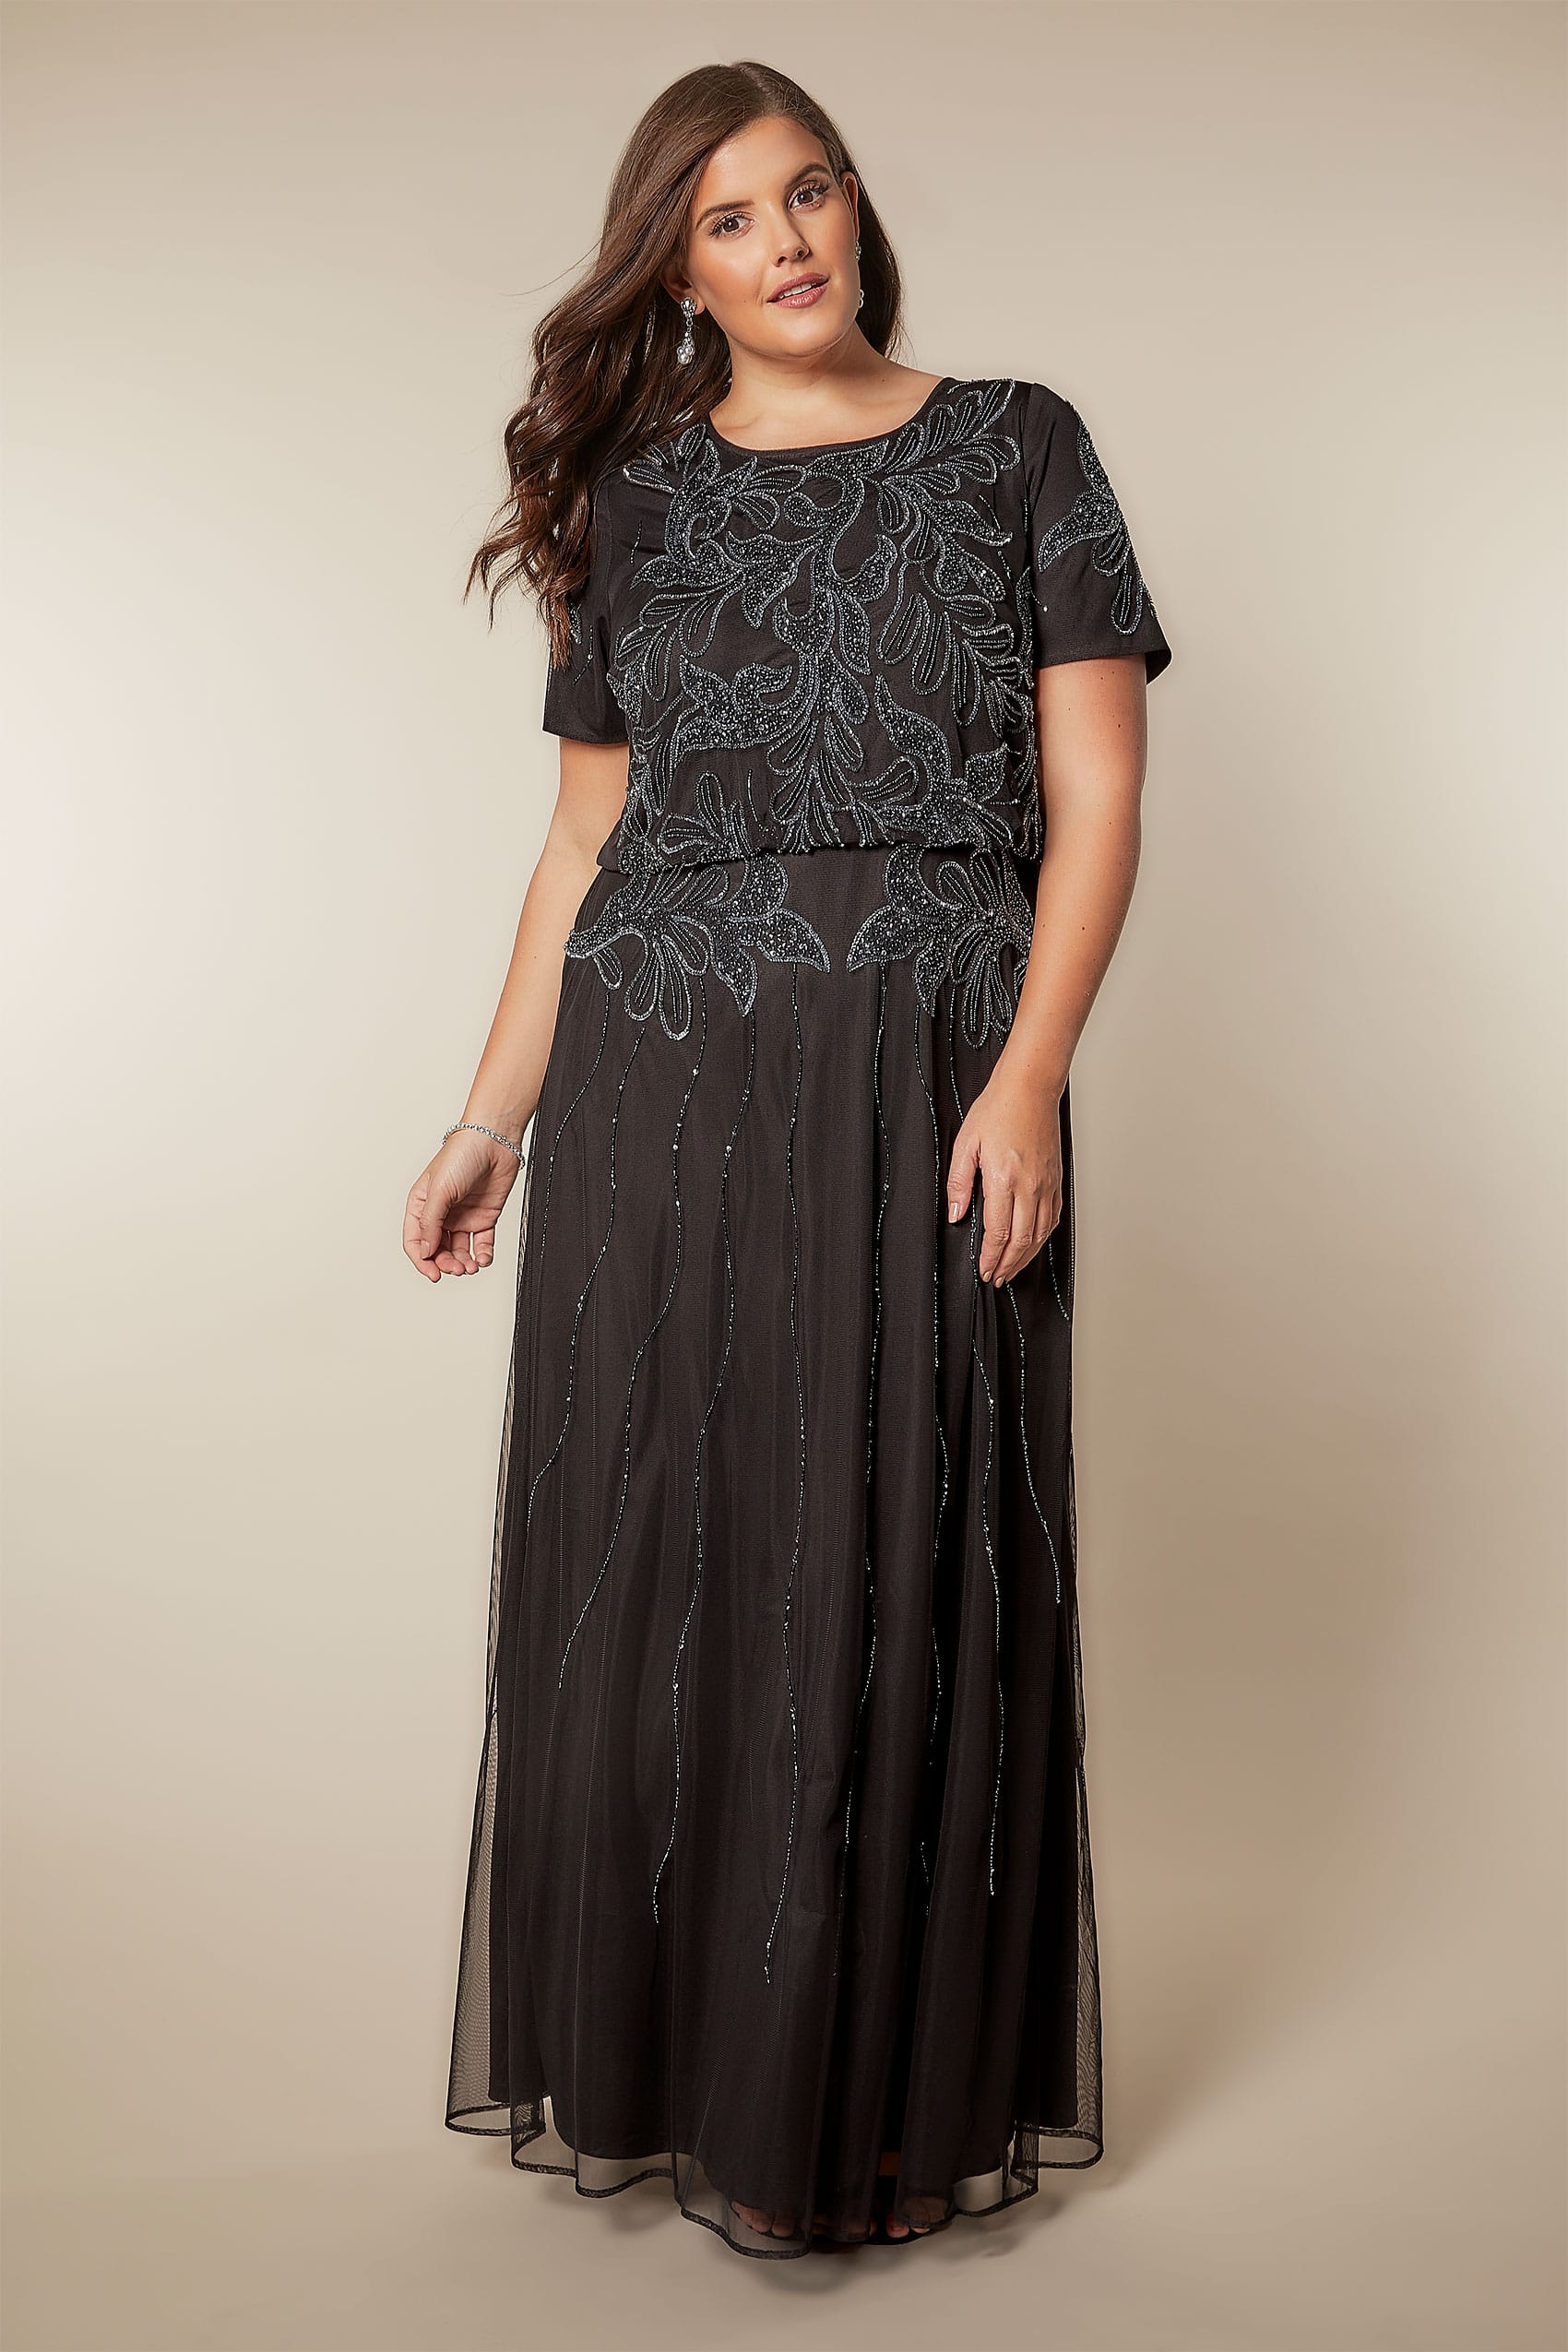 Luxe Black Sequin Embellished Fully Lined Maxi Dress With